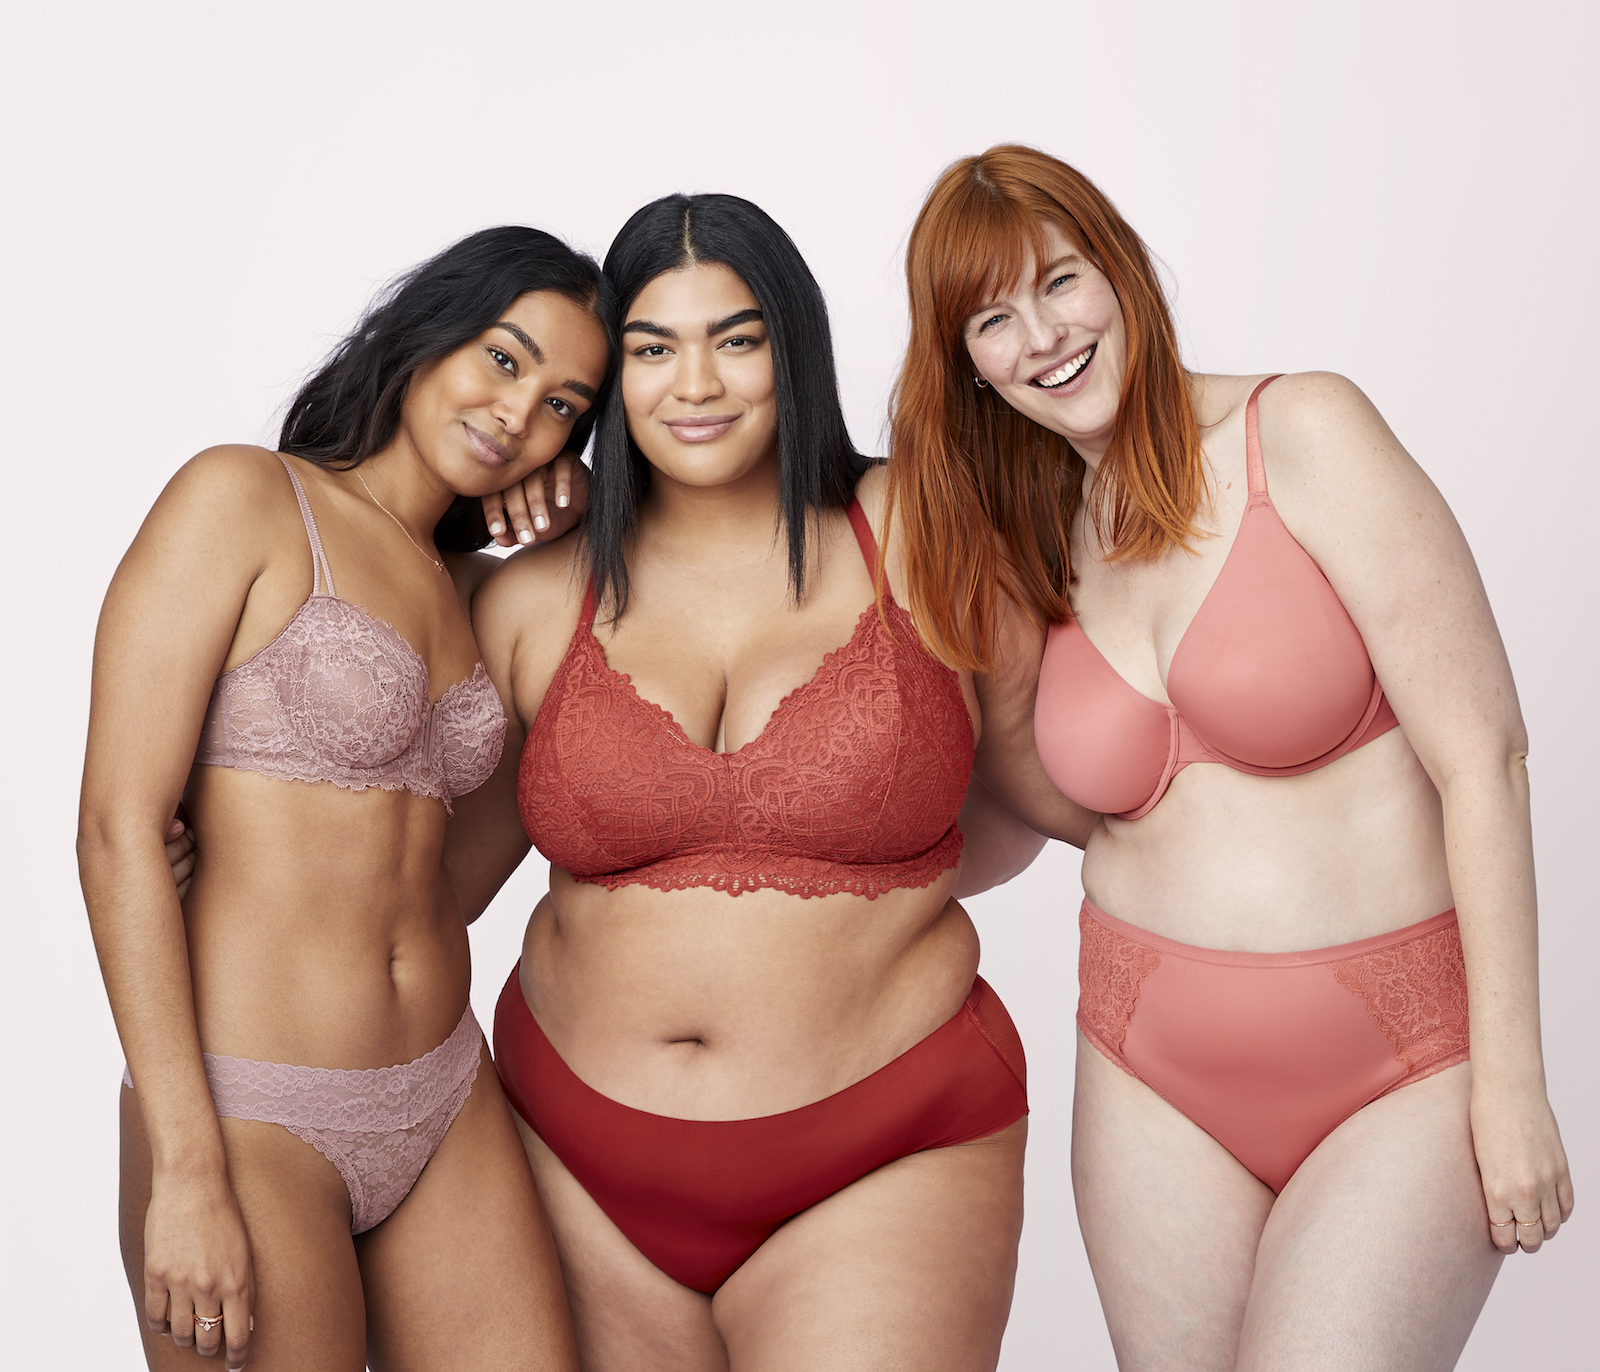 Target forays deeper into private-label with new lingerie line